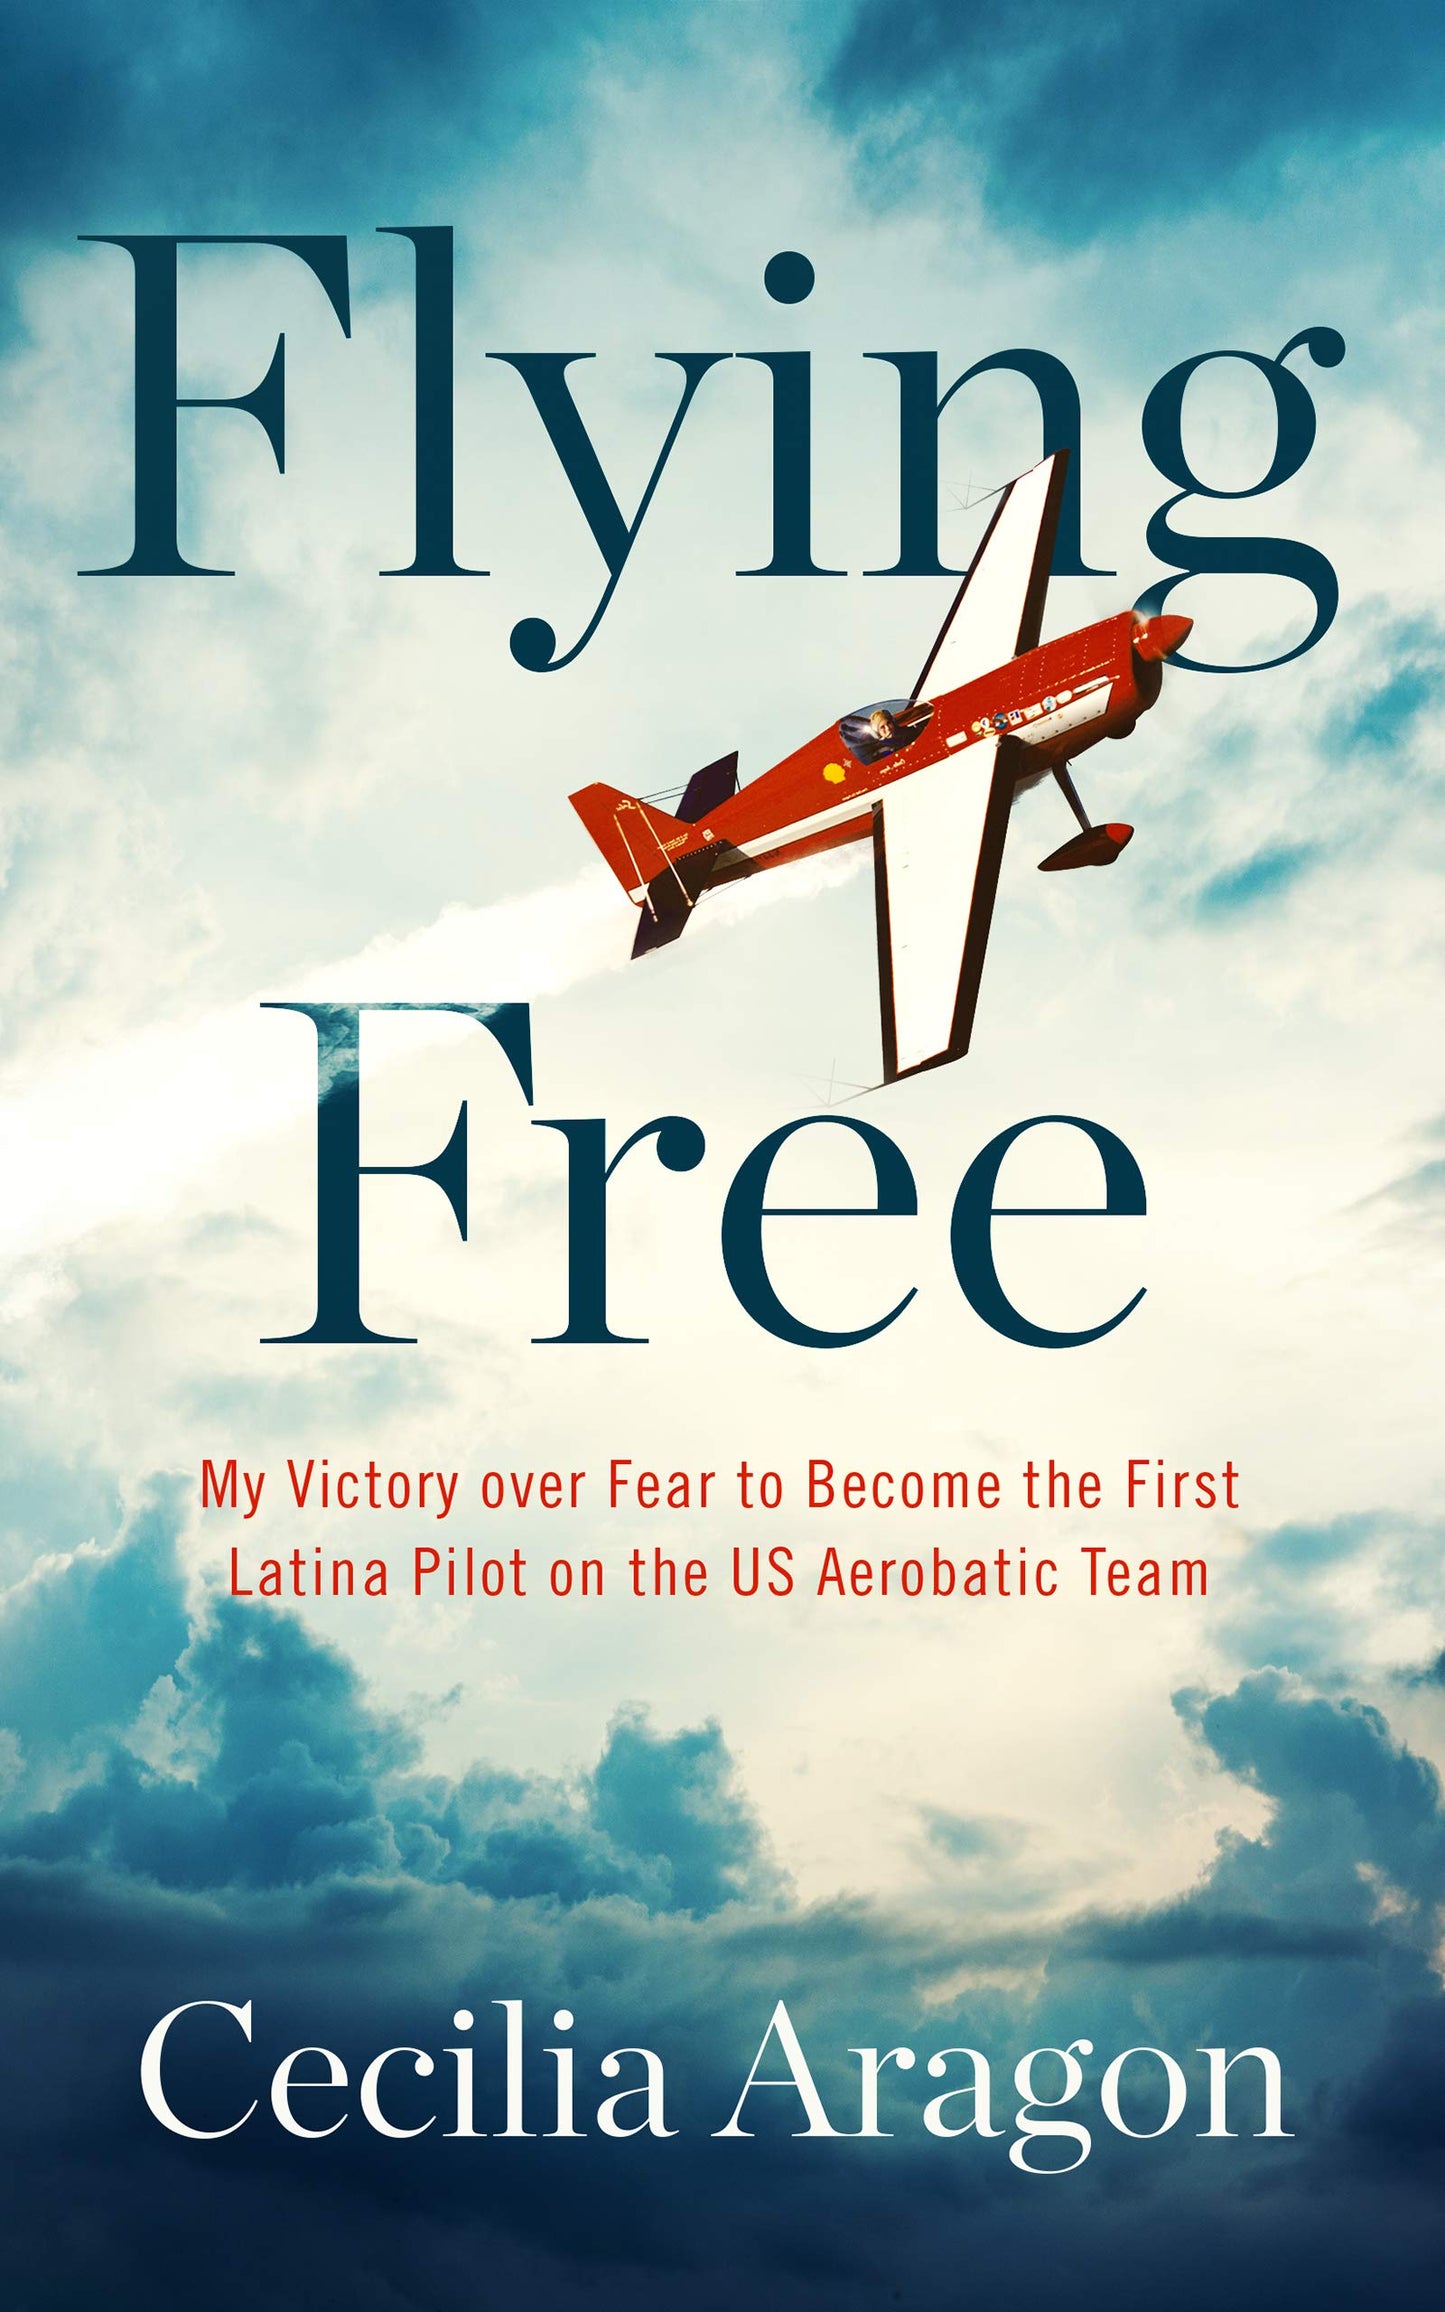 Flying Free: My Victory over Fear to Become the First Latina Pilot on the US Aerobatic Team ***